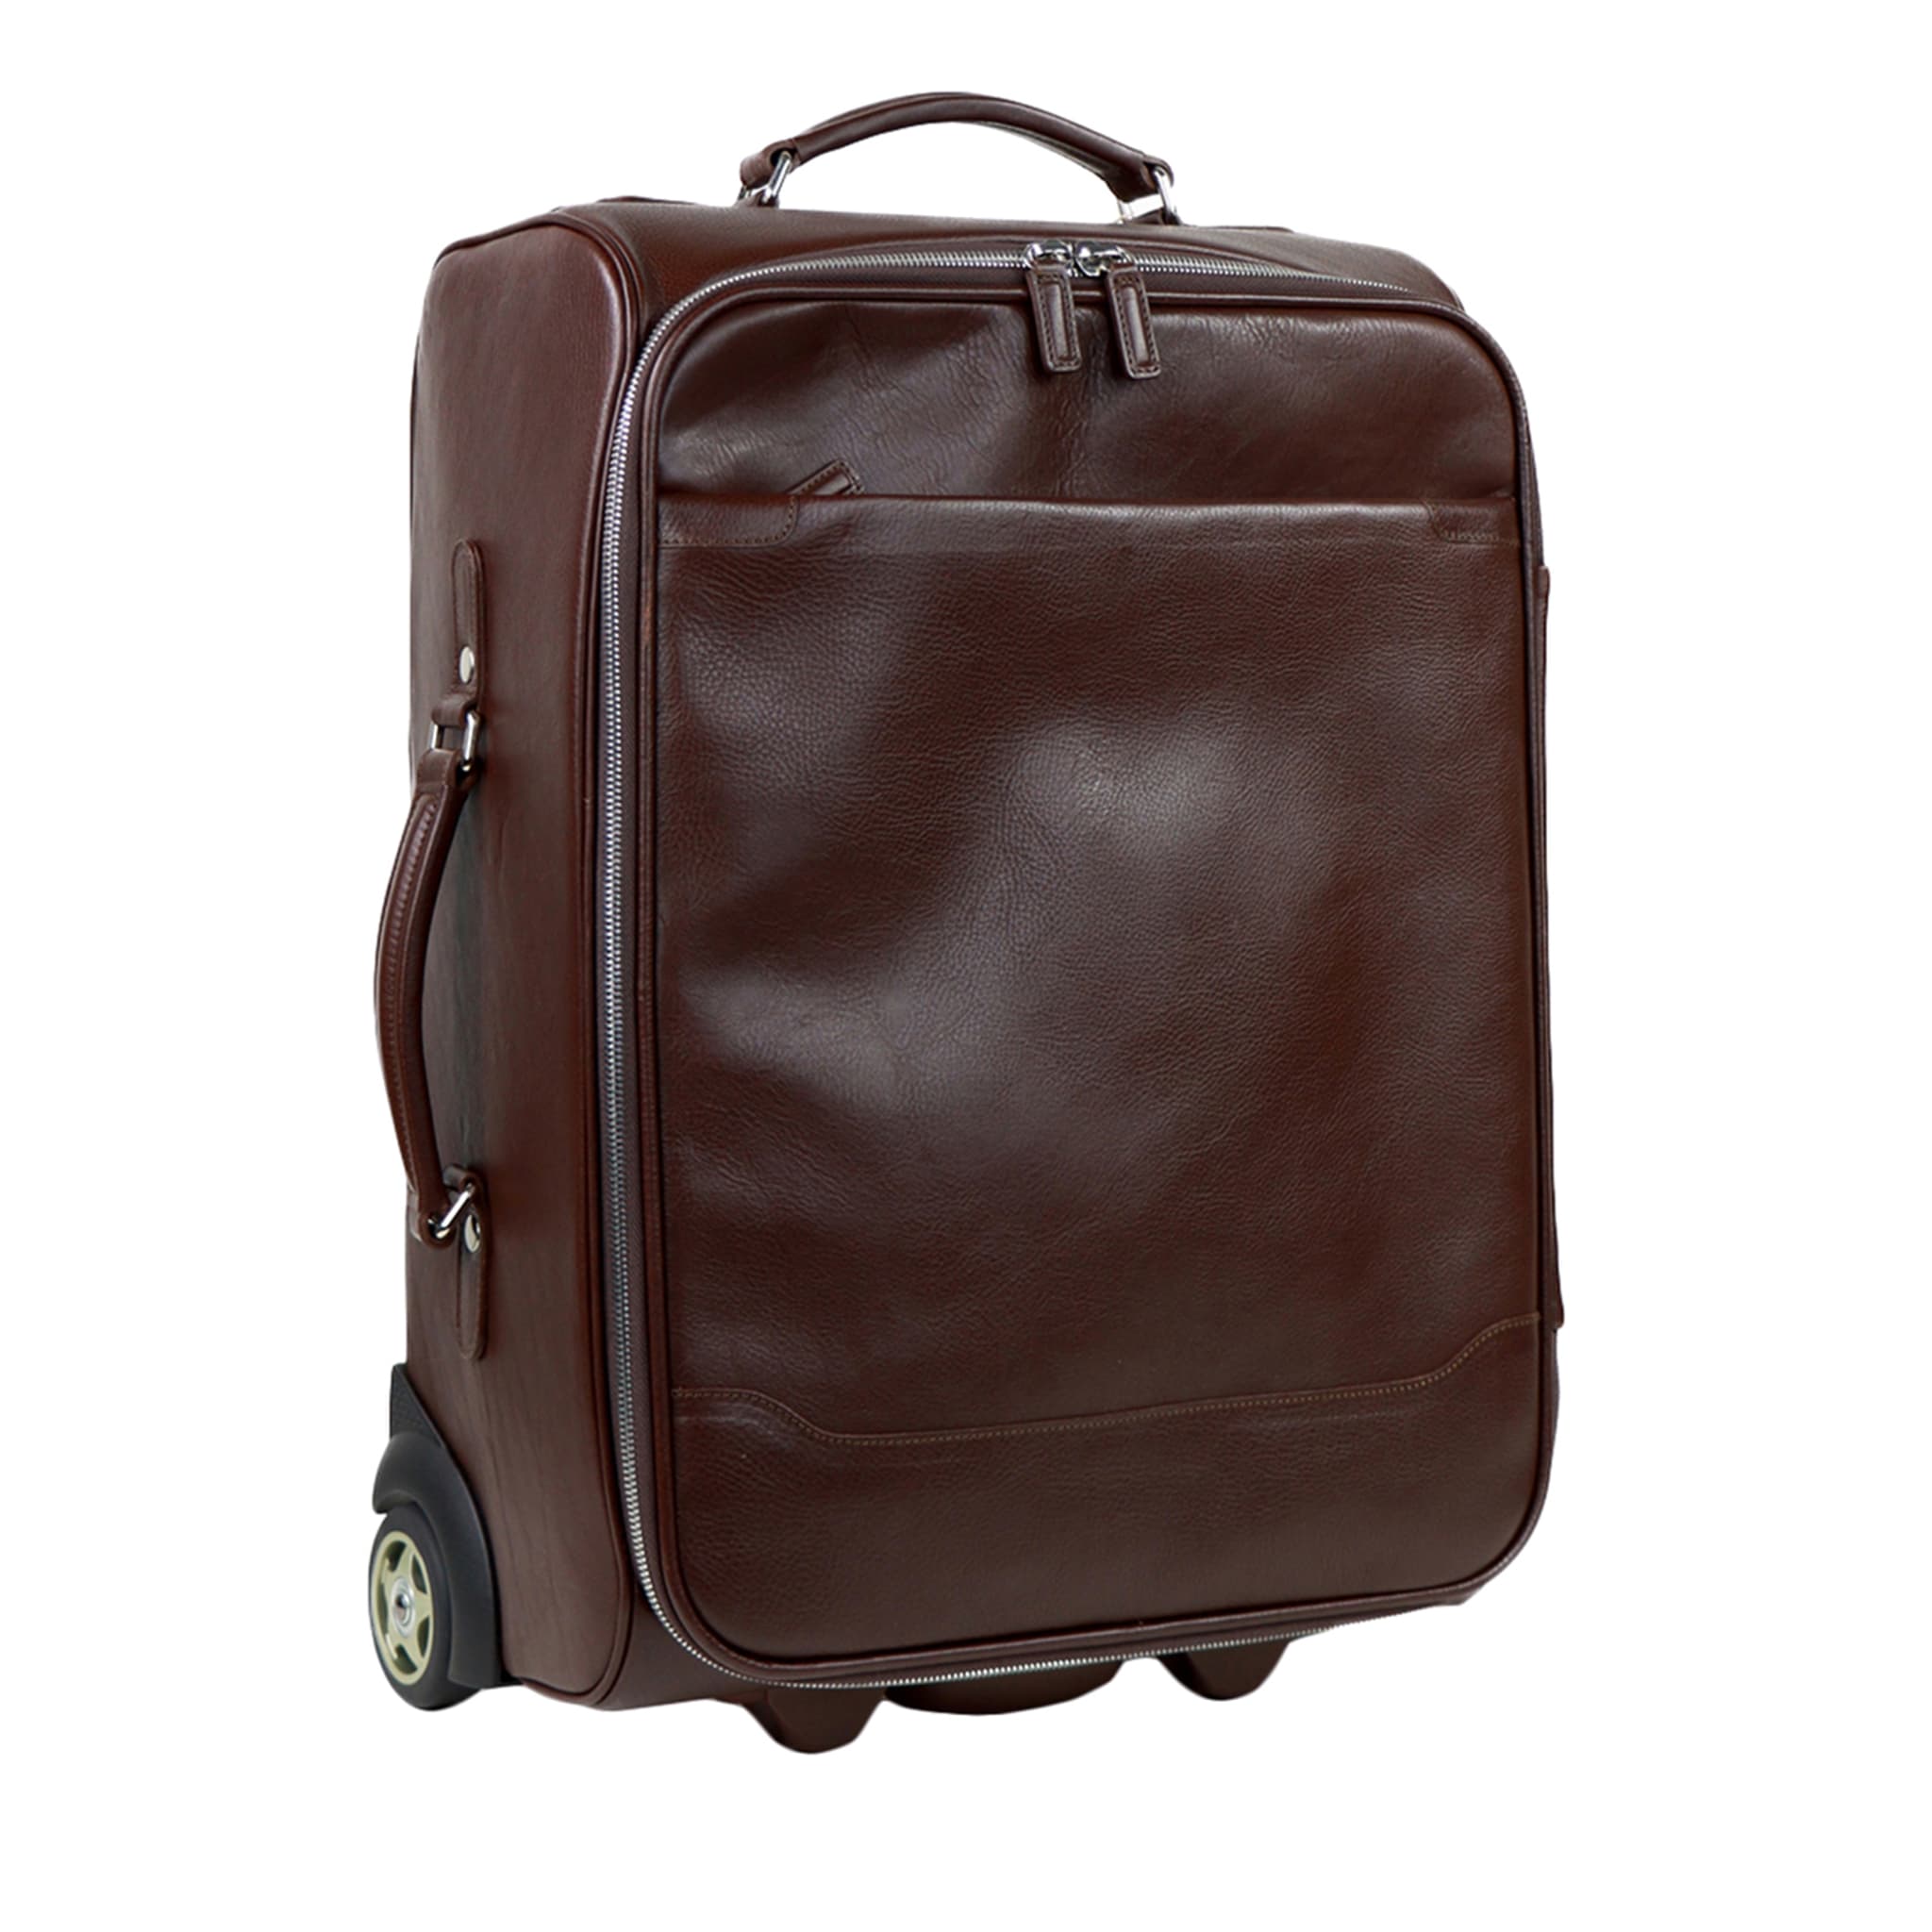 Brown Trolley Suitcase - Main view